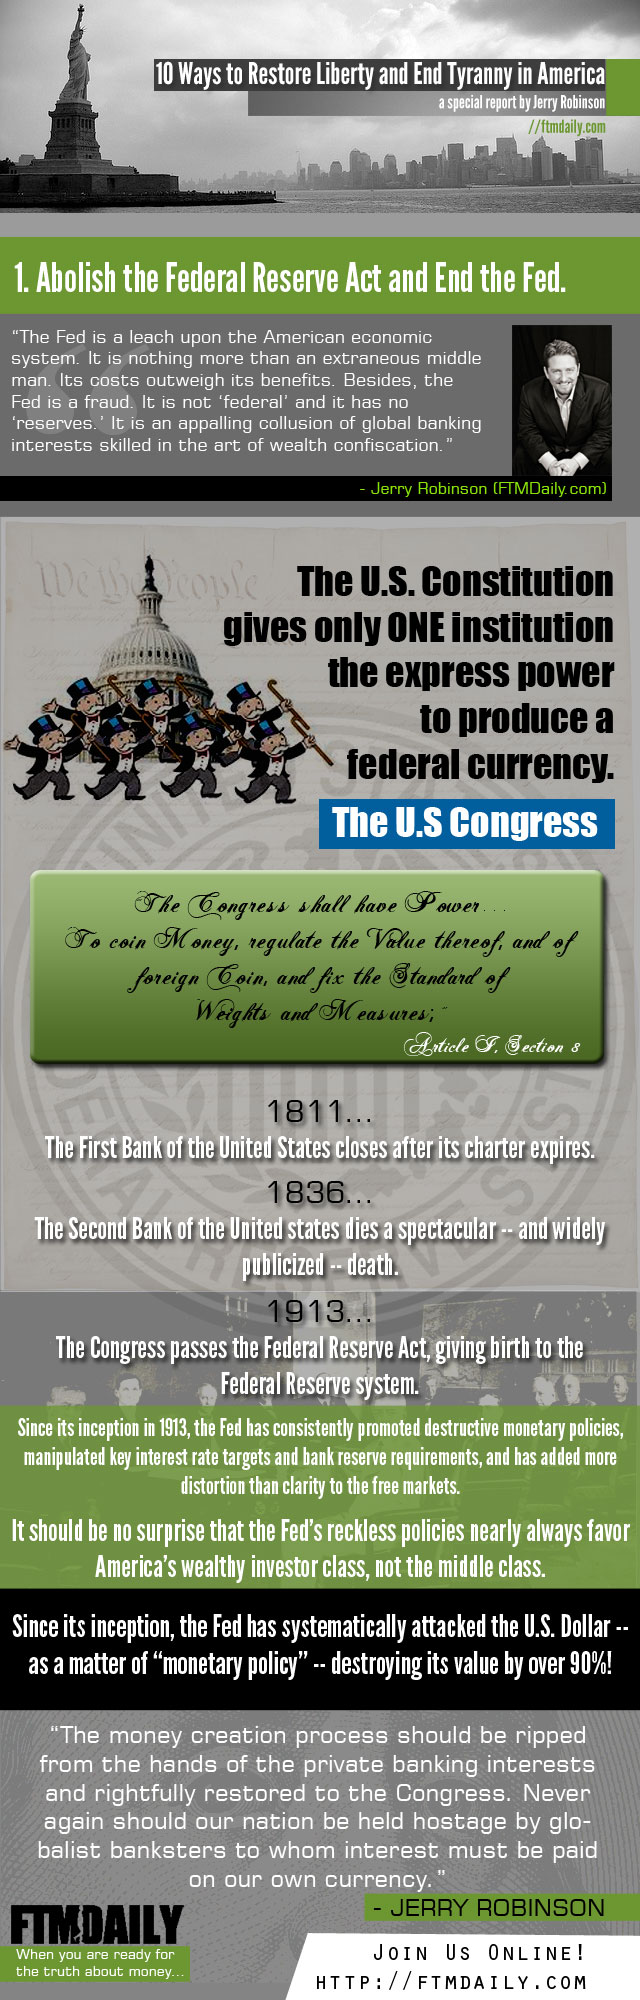 End the Fed - Infographic